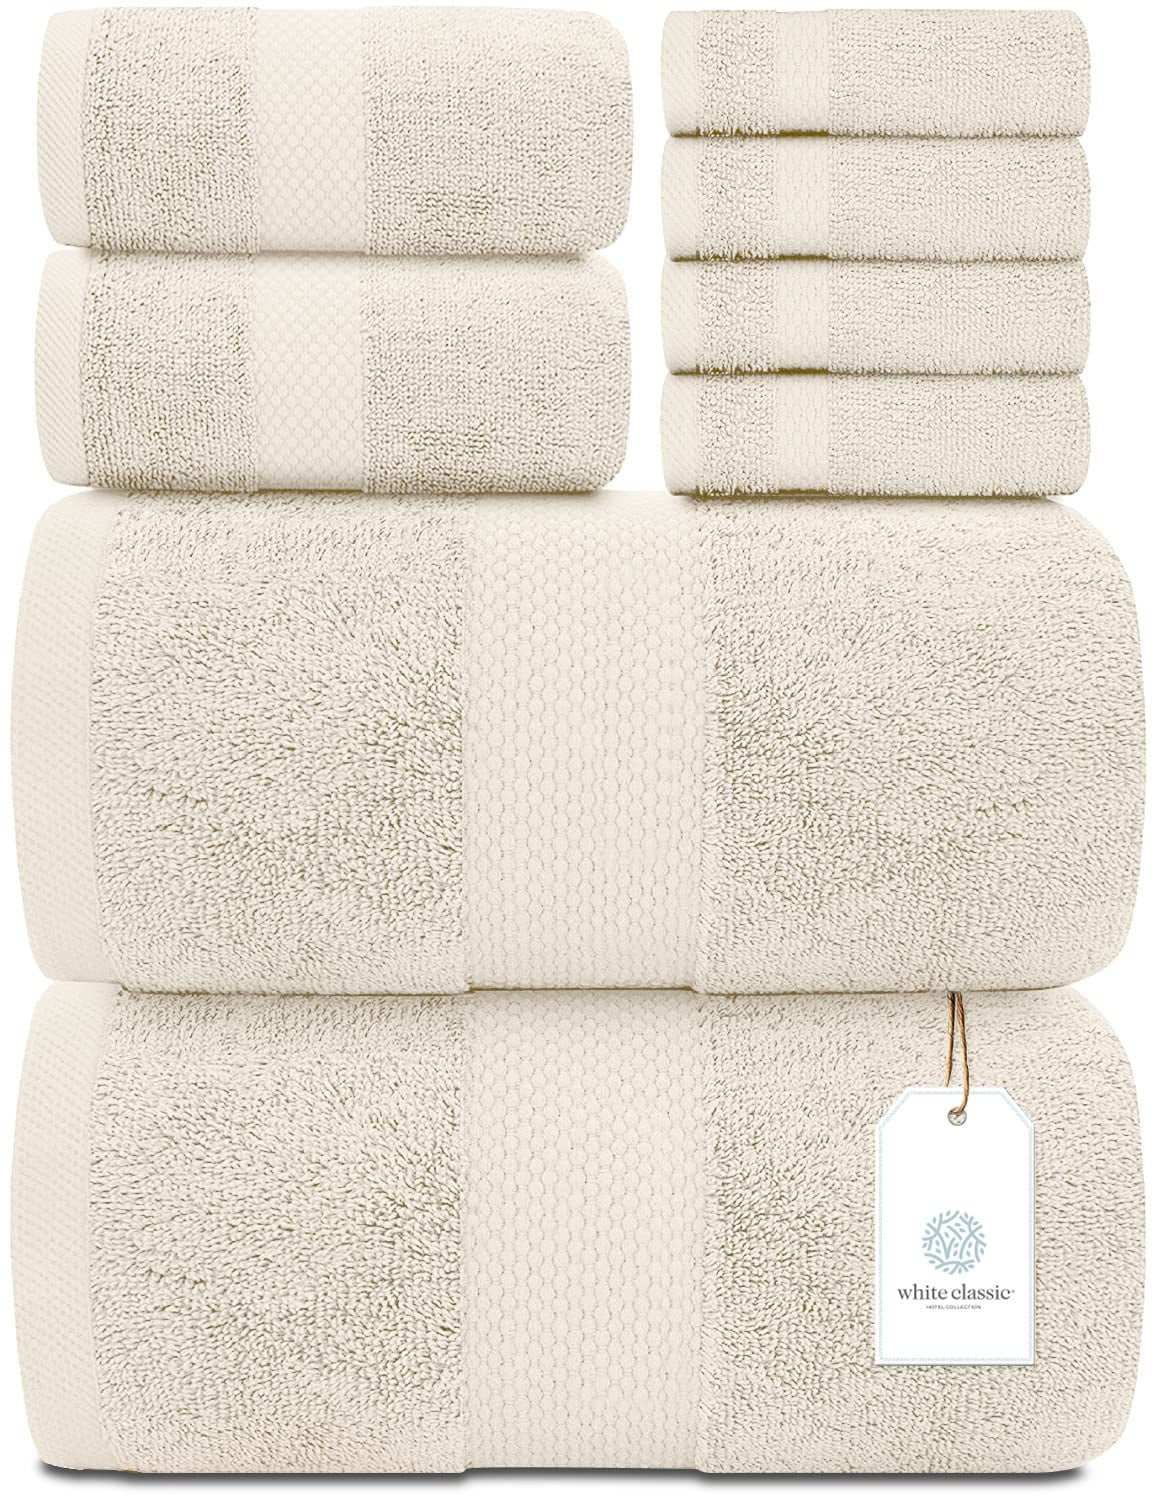 White Classic Luxury Pink Bath Towel Set - Combed Cotton Hotel Quality  Absorbent 8 Piece Towels | 2 Bath Towels | 2 Hand Towels | 4 Washcloths  [Worth